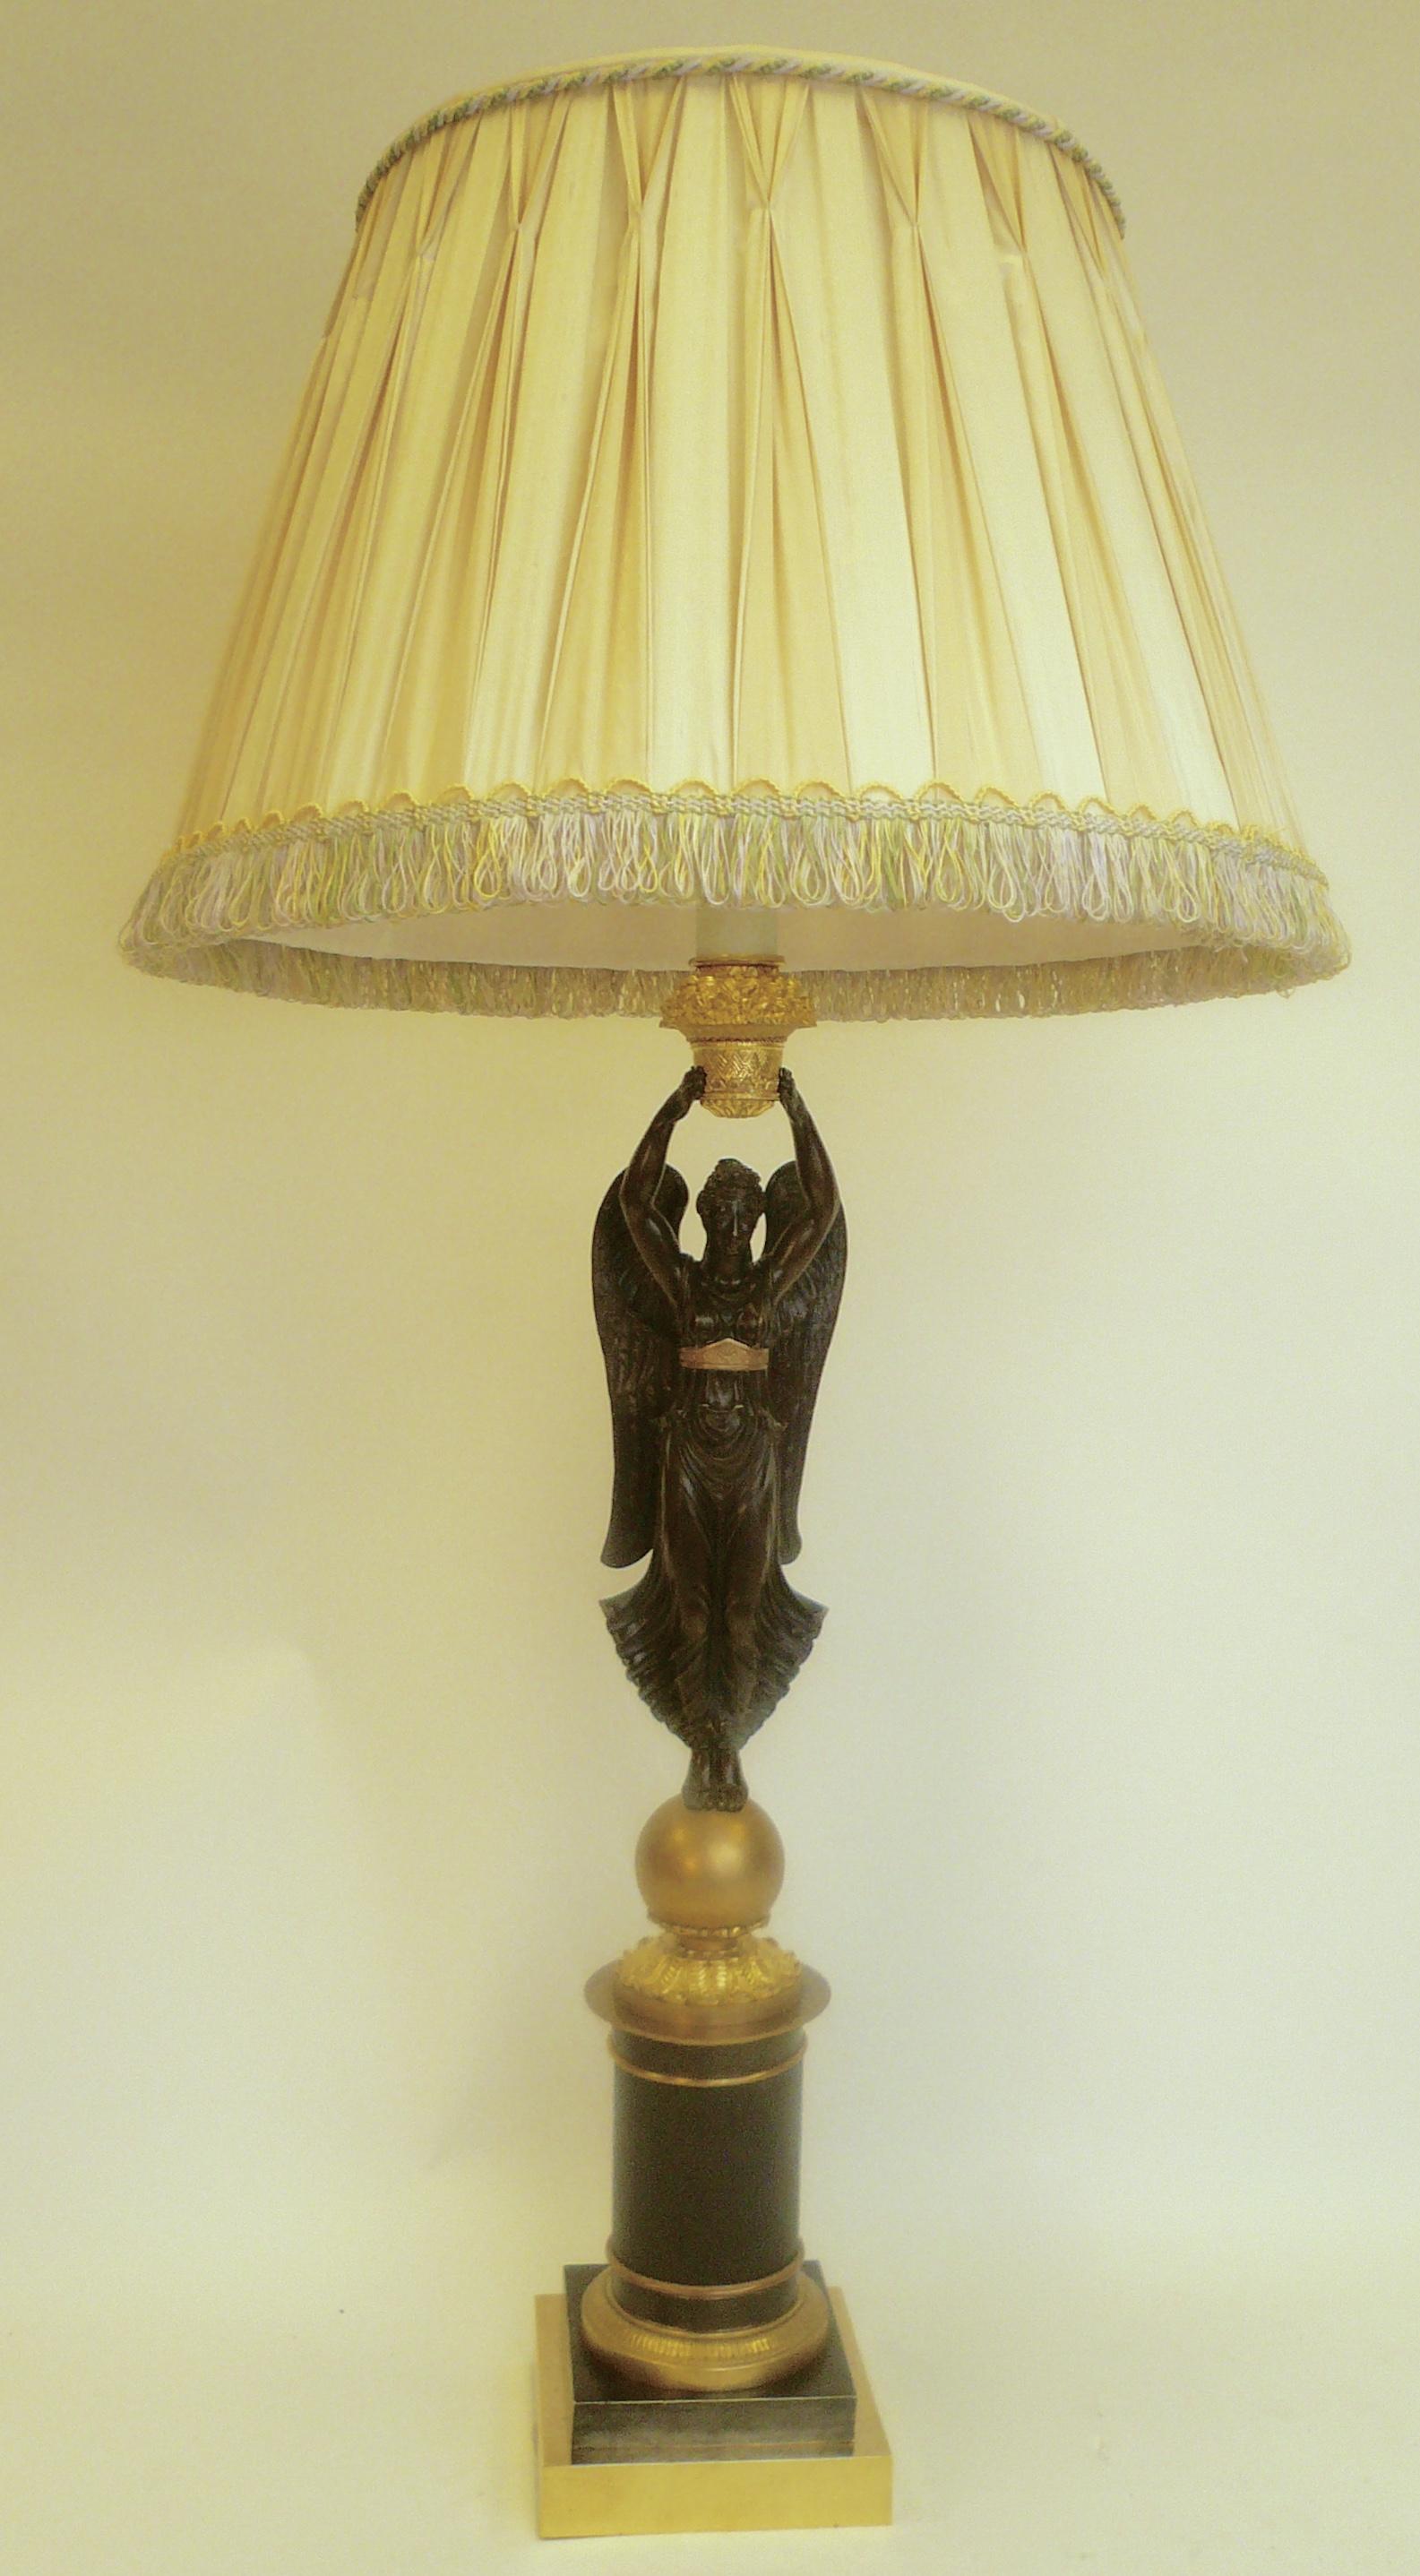 Gilt Pair of Early 19th Century French Empire Figural Bronze Lamps